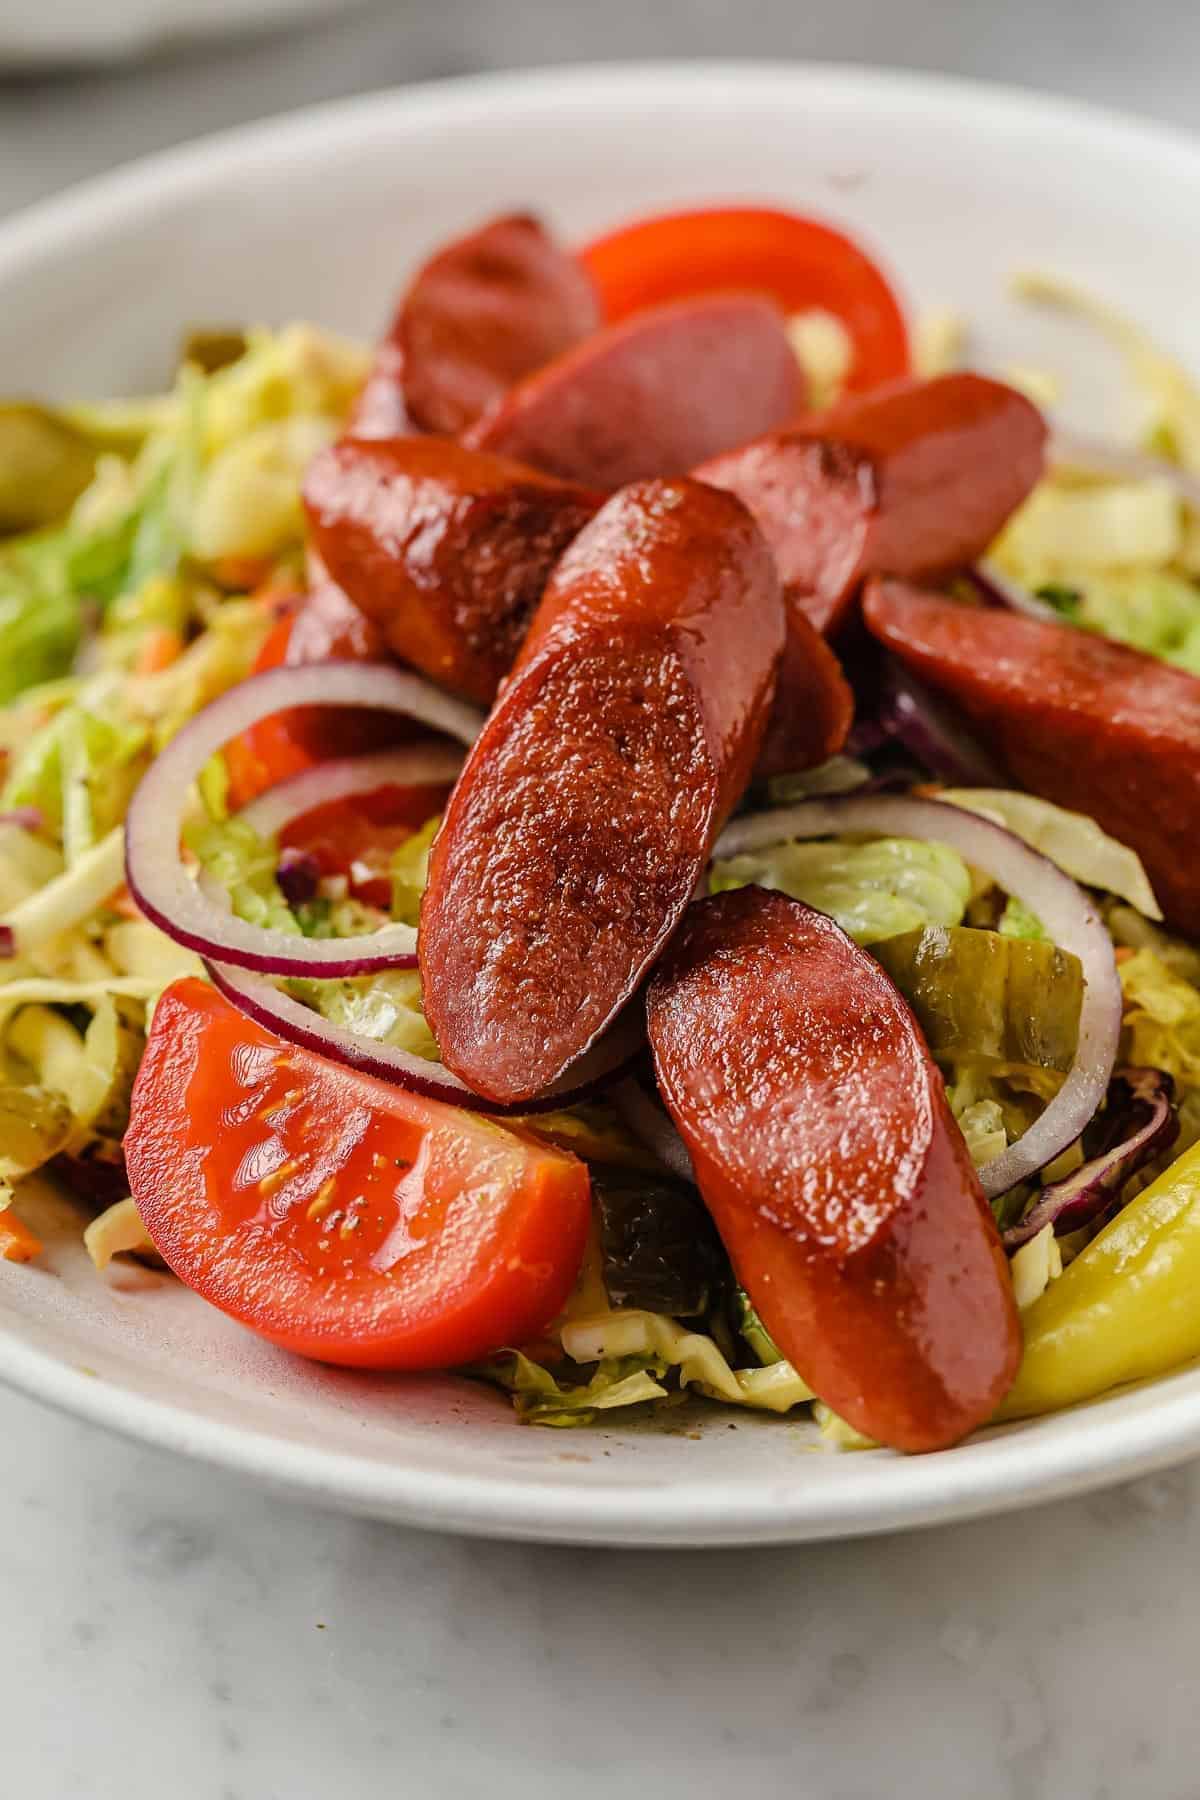 Delicious chicago dog salad in a white bowl.